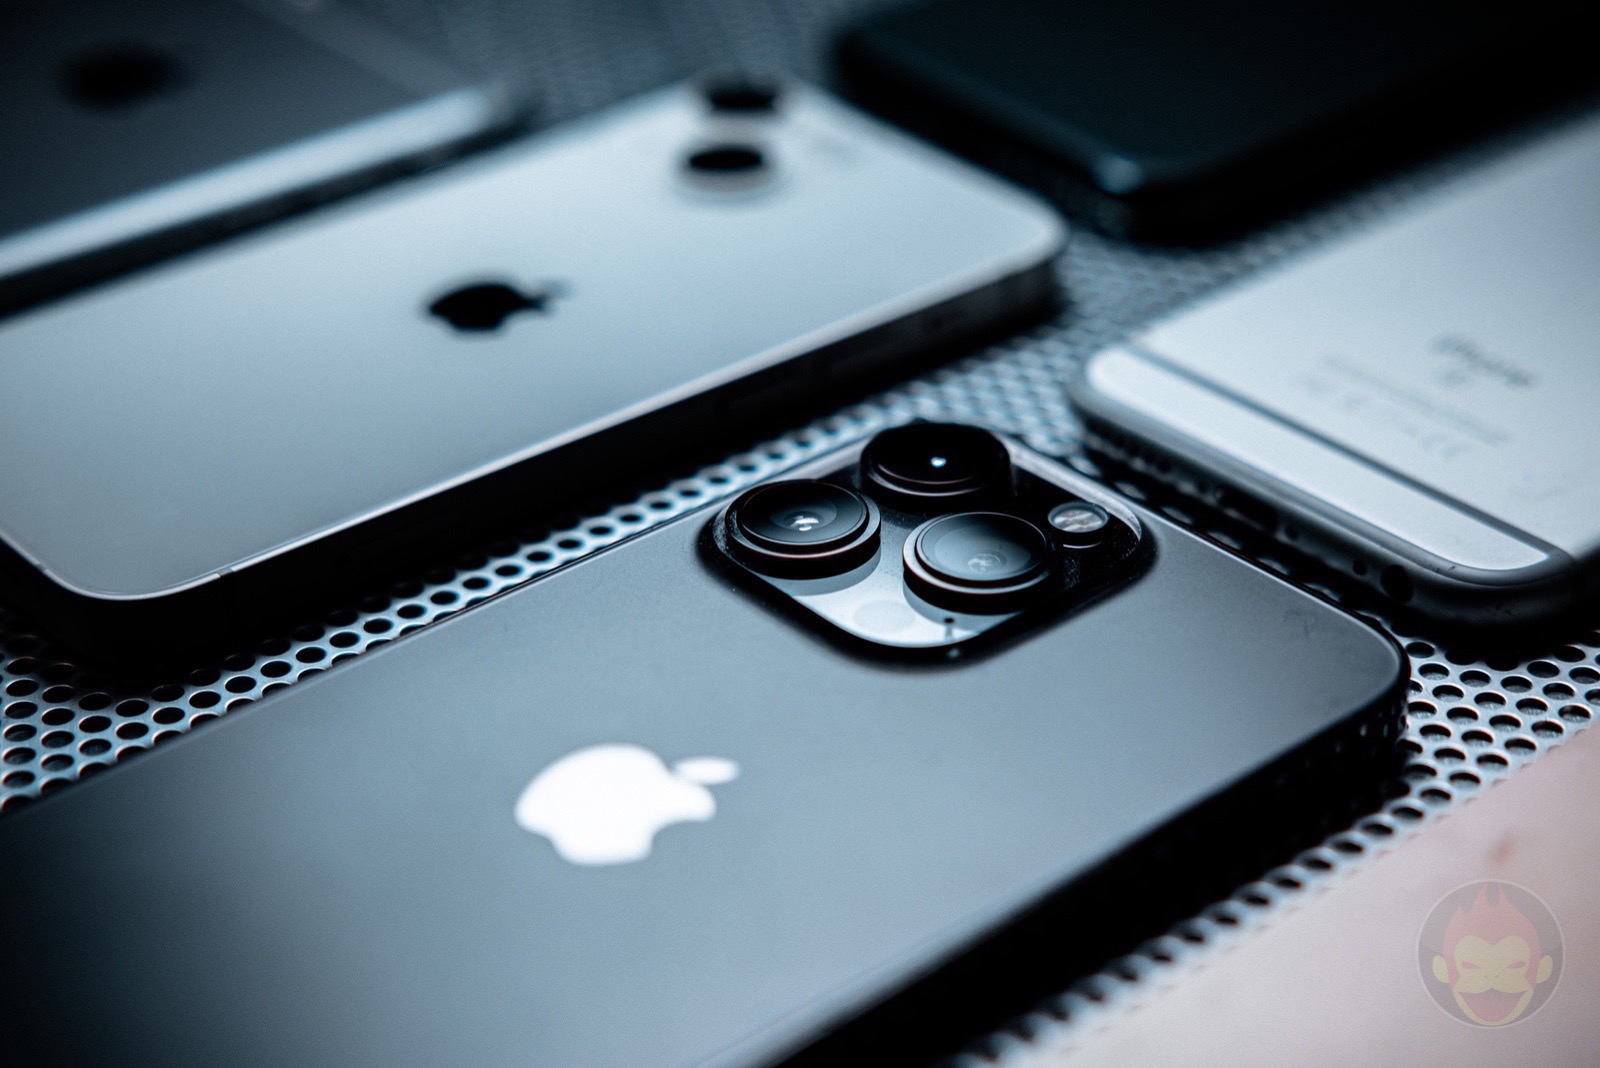 iphone13pro-and-other-iphones-camera-02.jpg